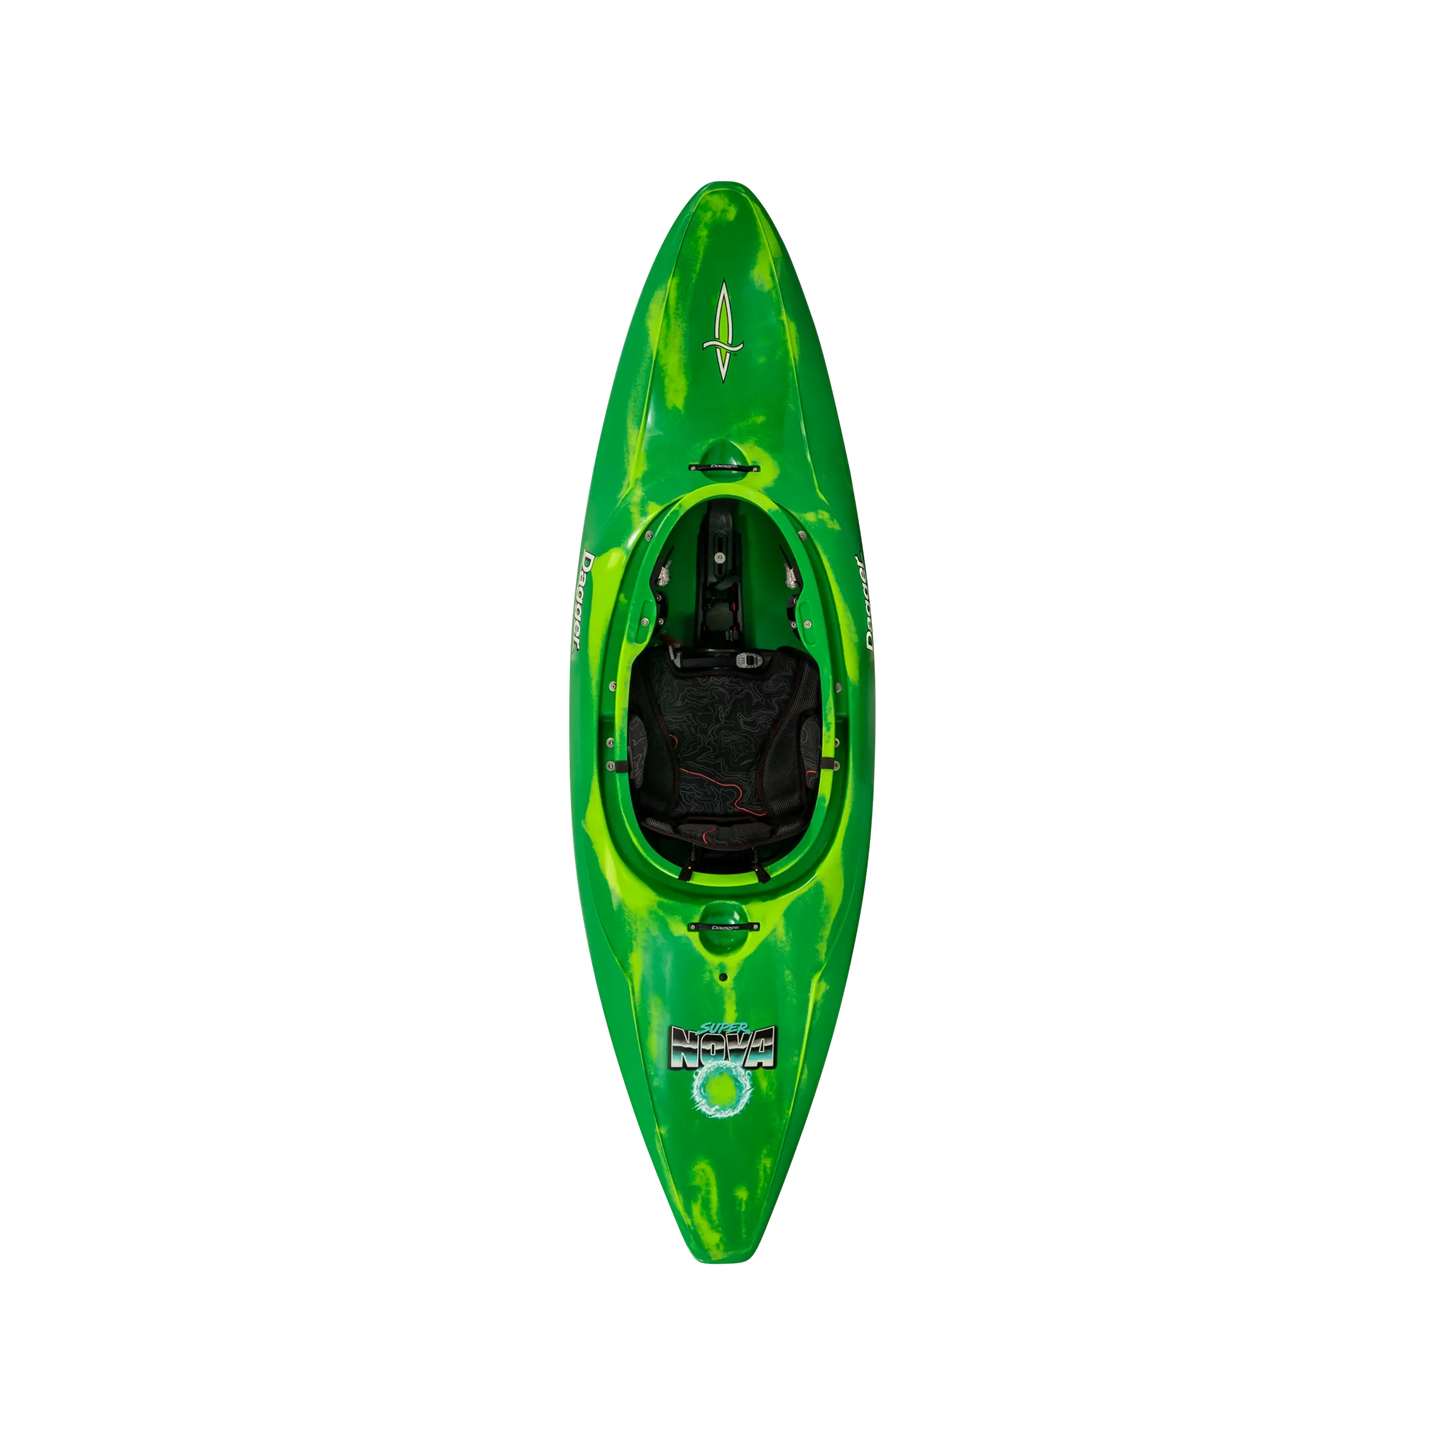 Green Dagger Nova / Super Nova kayak with black seating and contour ergo outfitting, viewed from above on a black background.